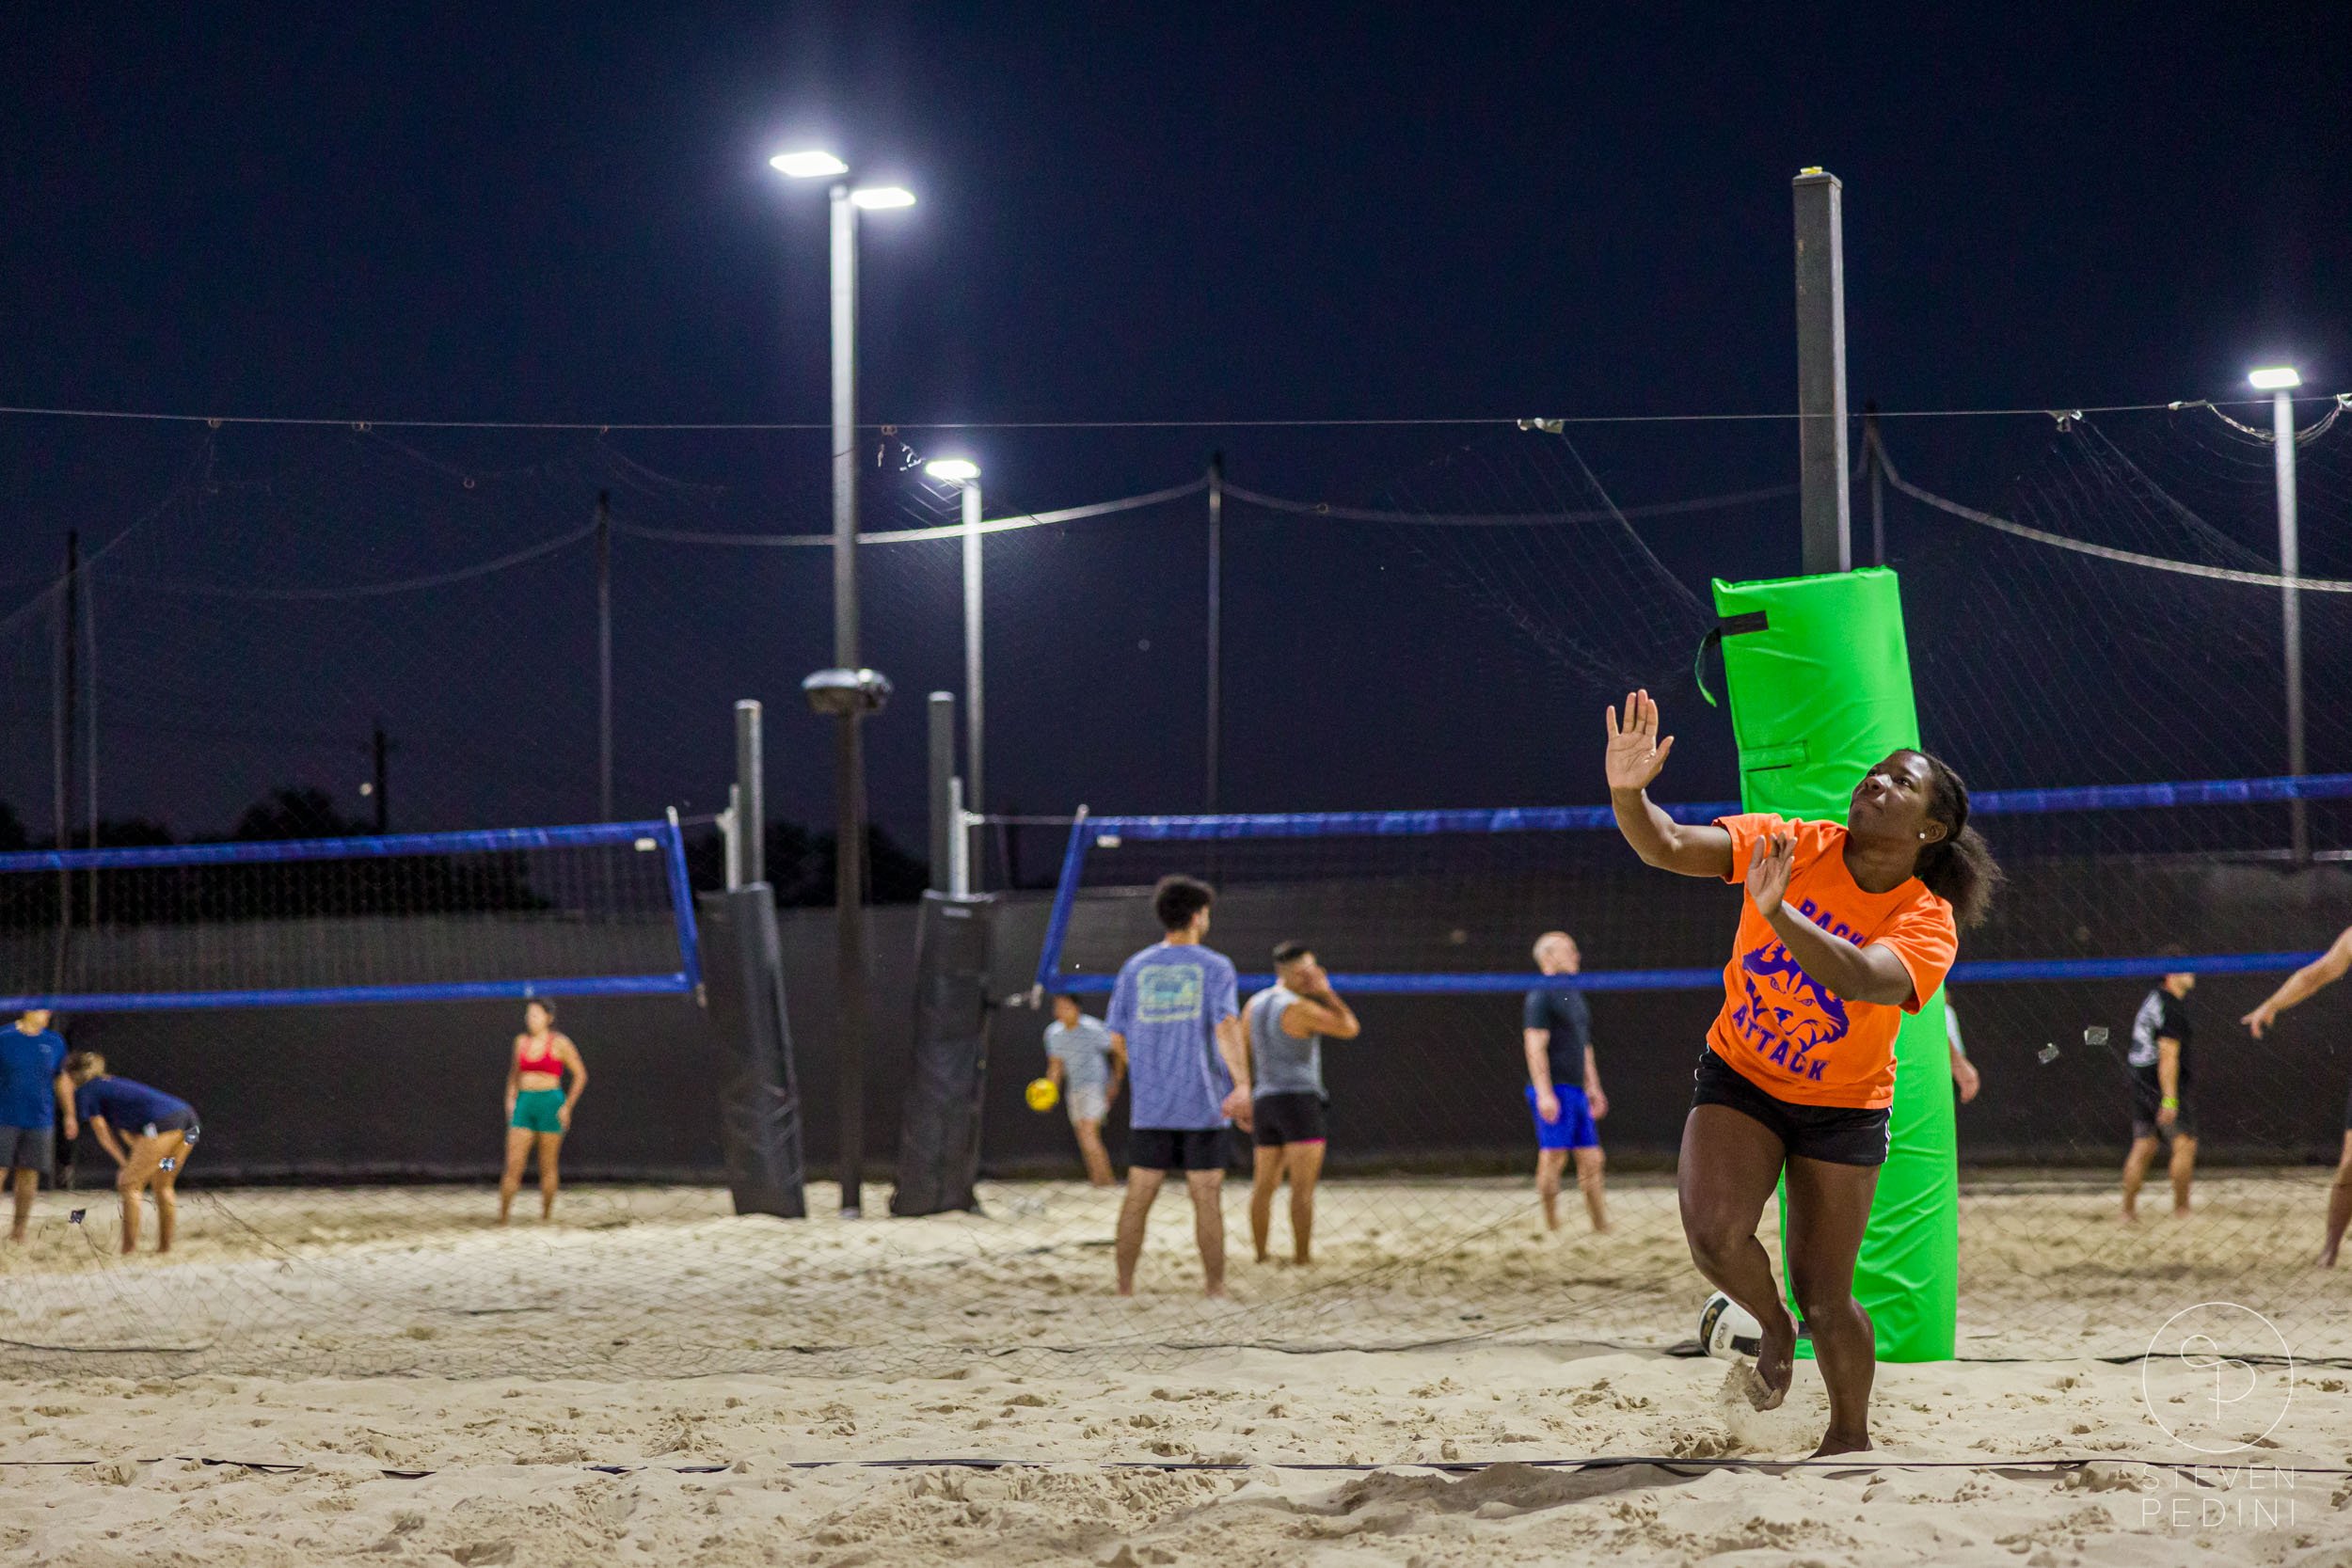 Steven Pedini Photography - Bumpy Pickle - Sand Volleyball - Houston TX - World Cup of Volleyball - 00335.jpg